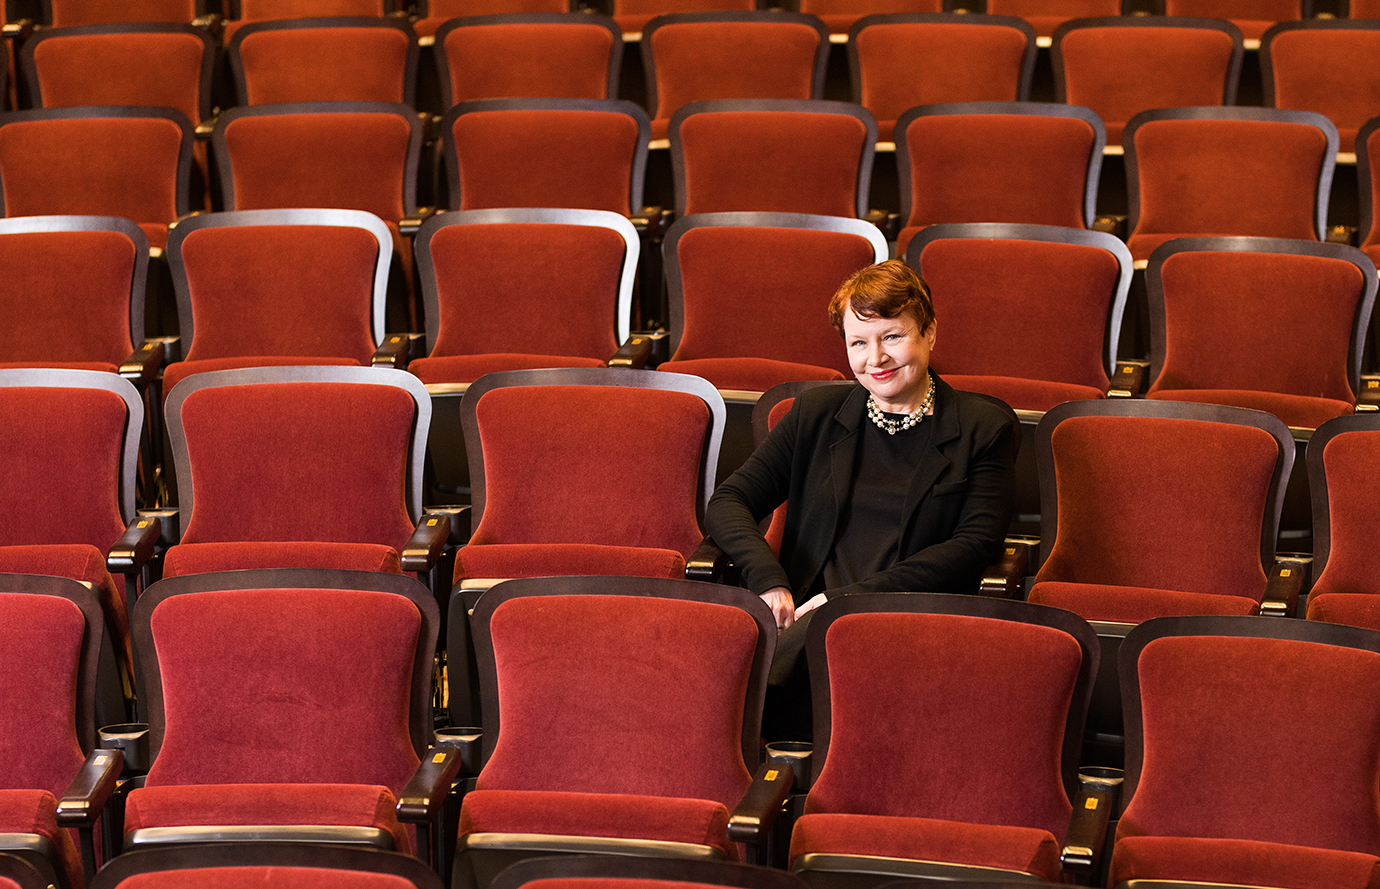 A woman sitting in a theatre, surrounded by red seats